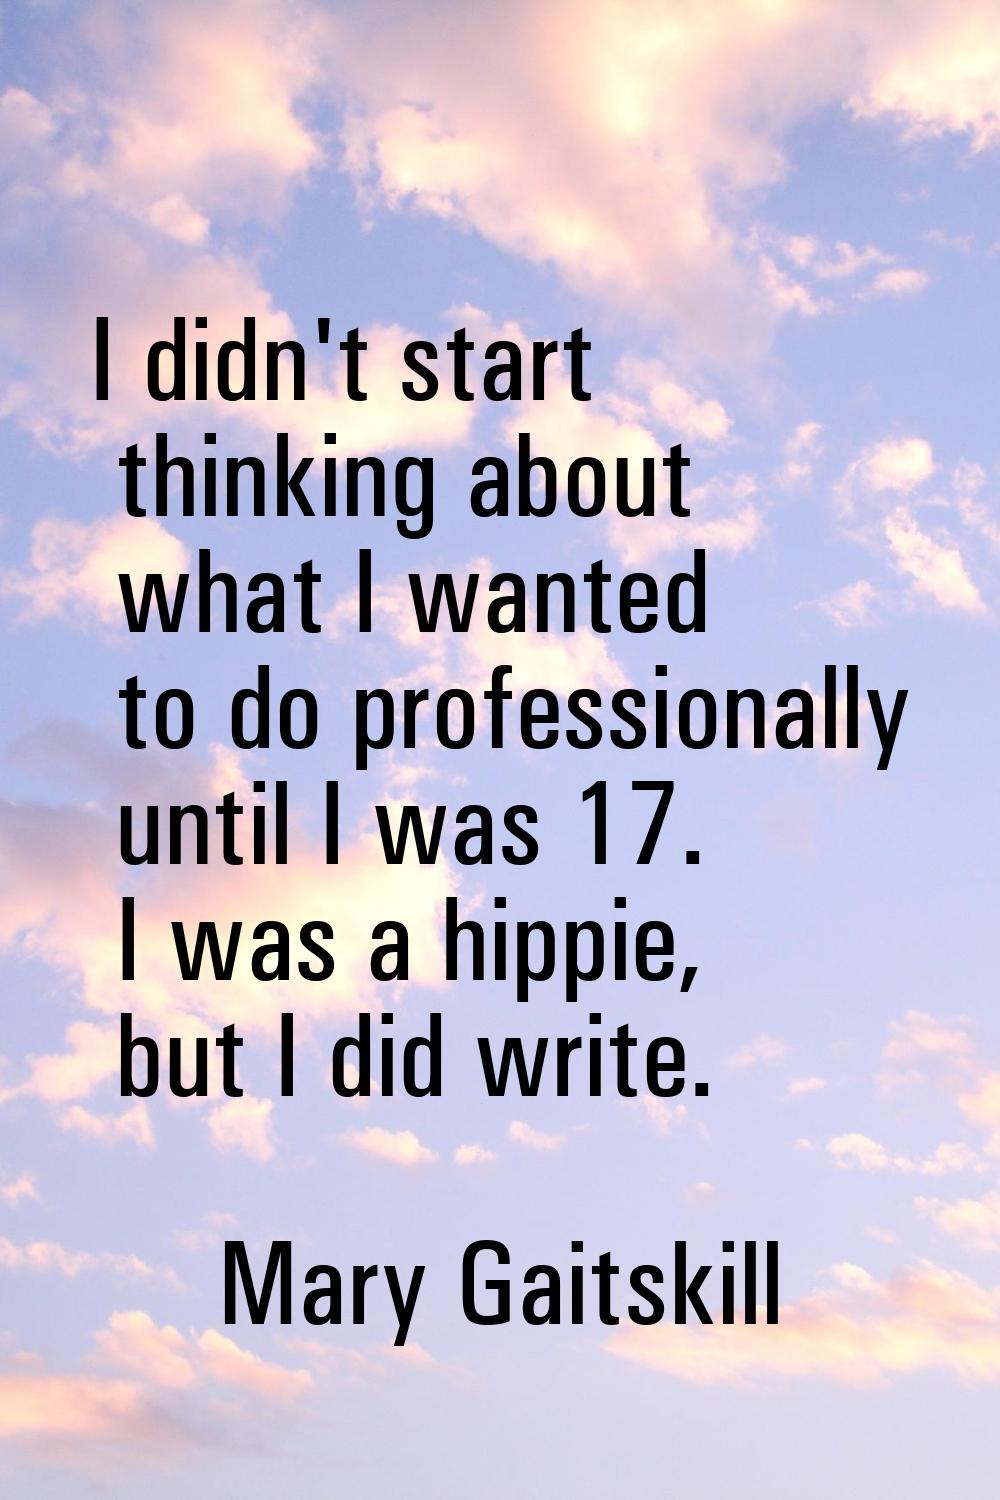 I didn't start thinking about what I wanted to do professionally until I was 17. I was a hippie, bu